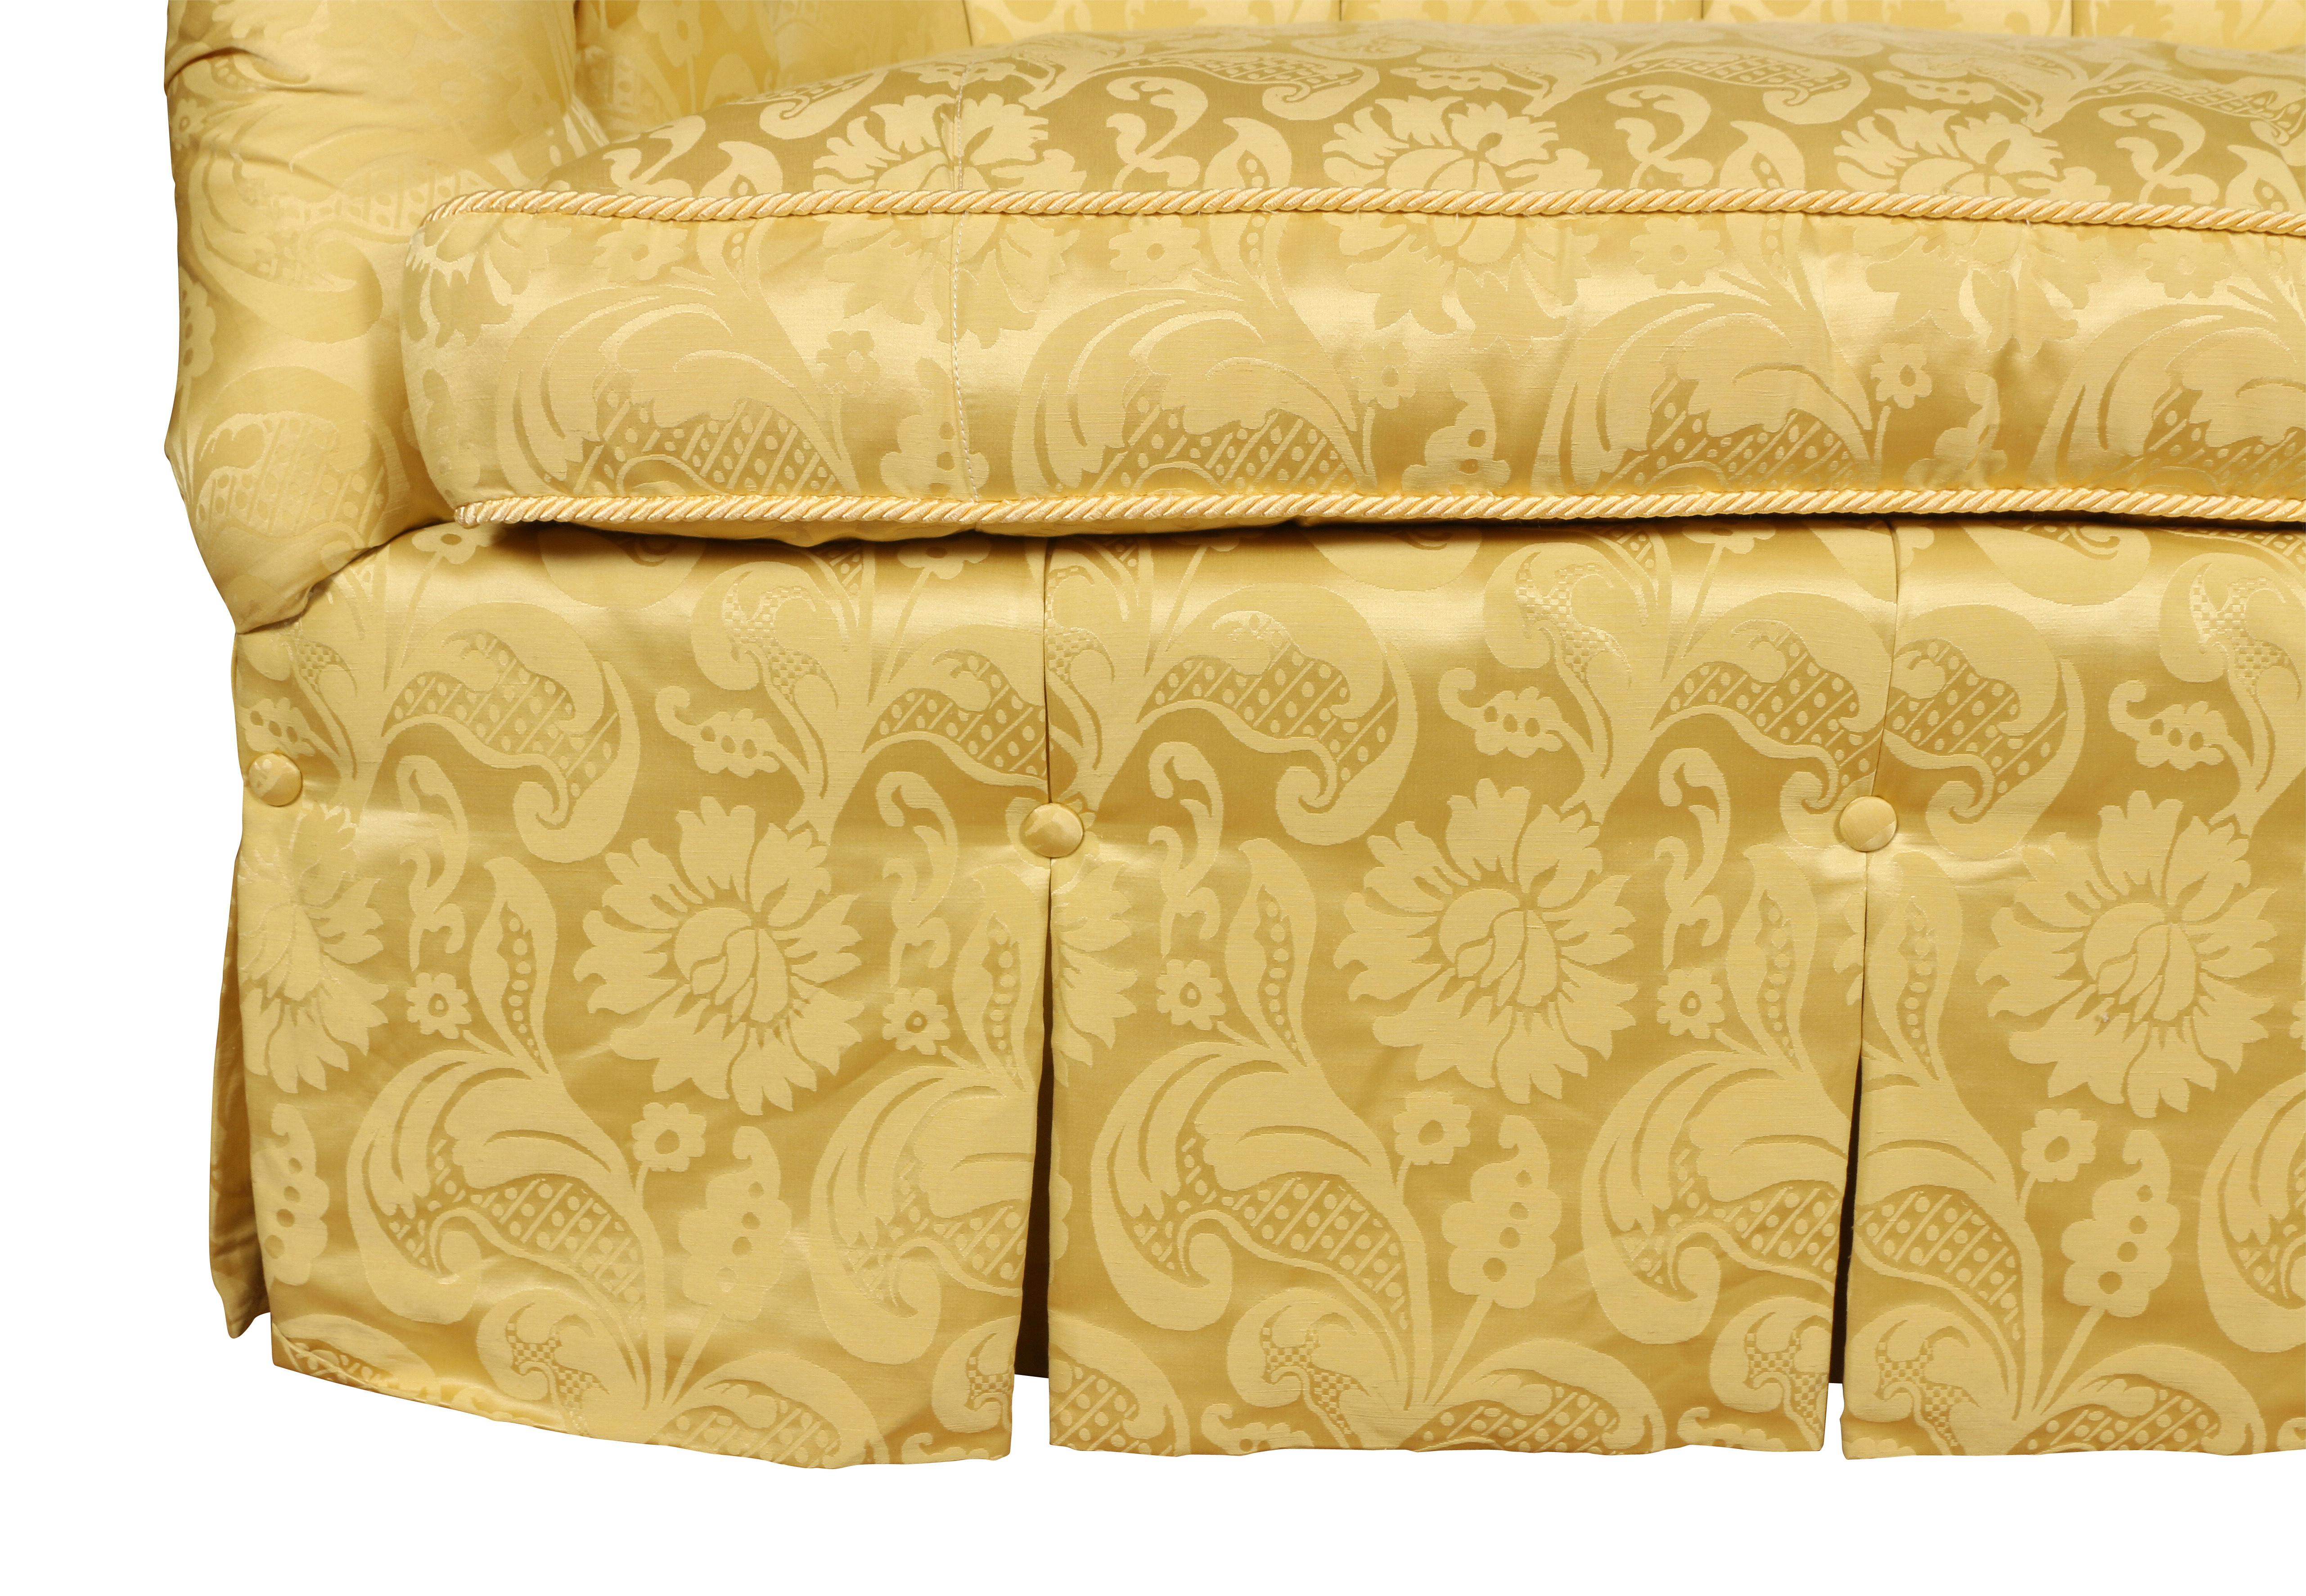 A charming loveseat with a shaped, tight tufted back and rolled arms. A loose seat cushion and a skirted bottom with buttons. The sofa is upholstered in a yellow silk damask with braided trim. One of a pair in our inventory. 